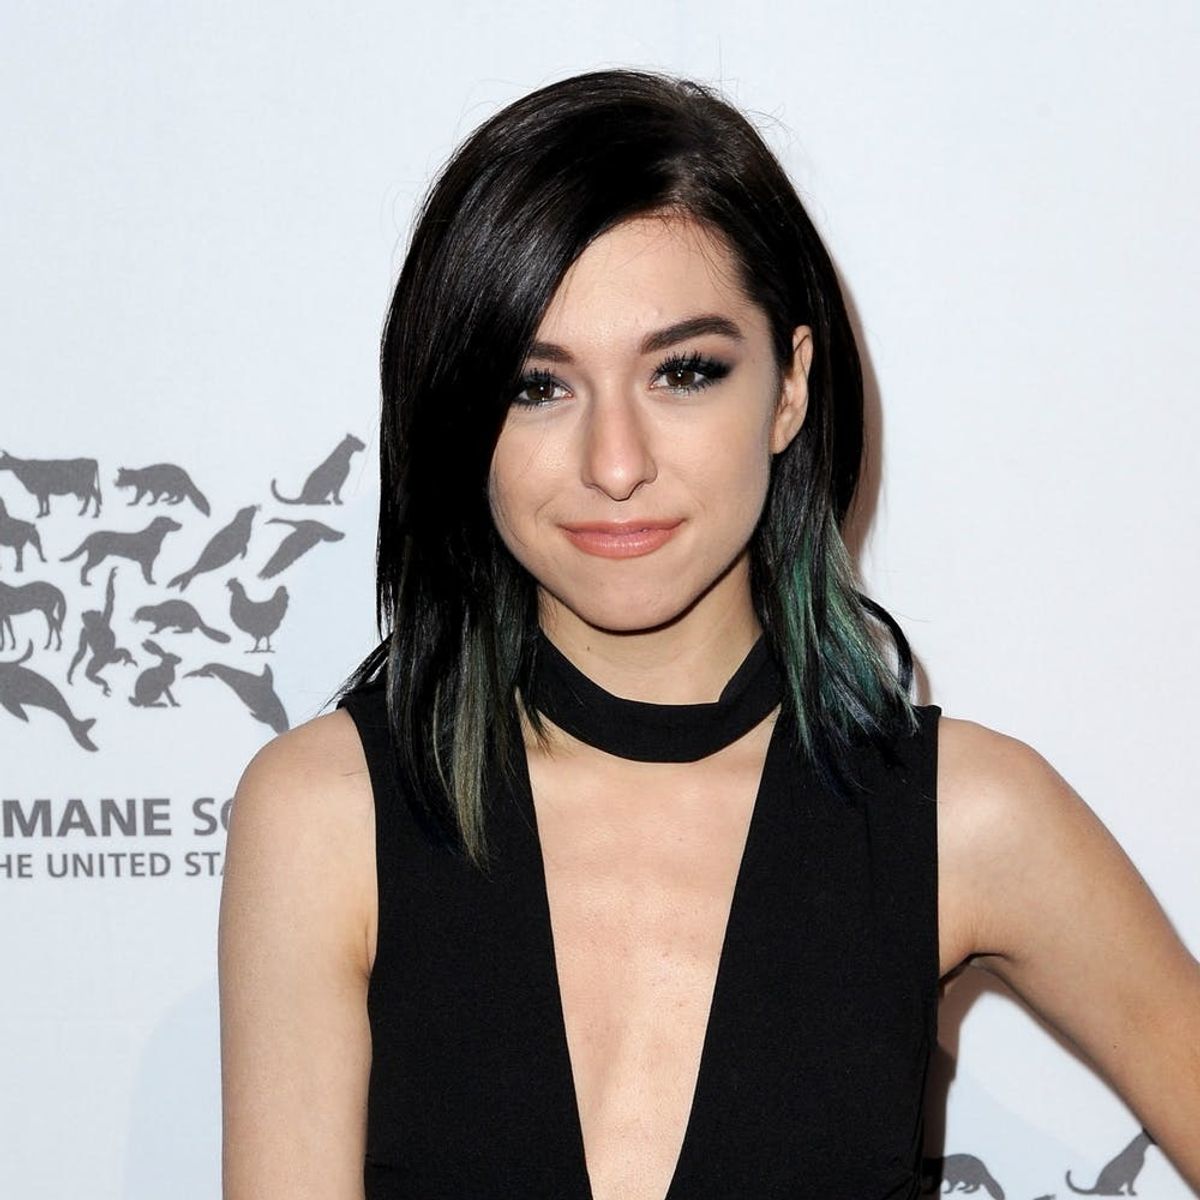 These Tributes to Christina Grimmie from The Voice Judges Will Break Your Heart